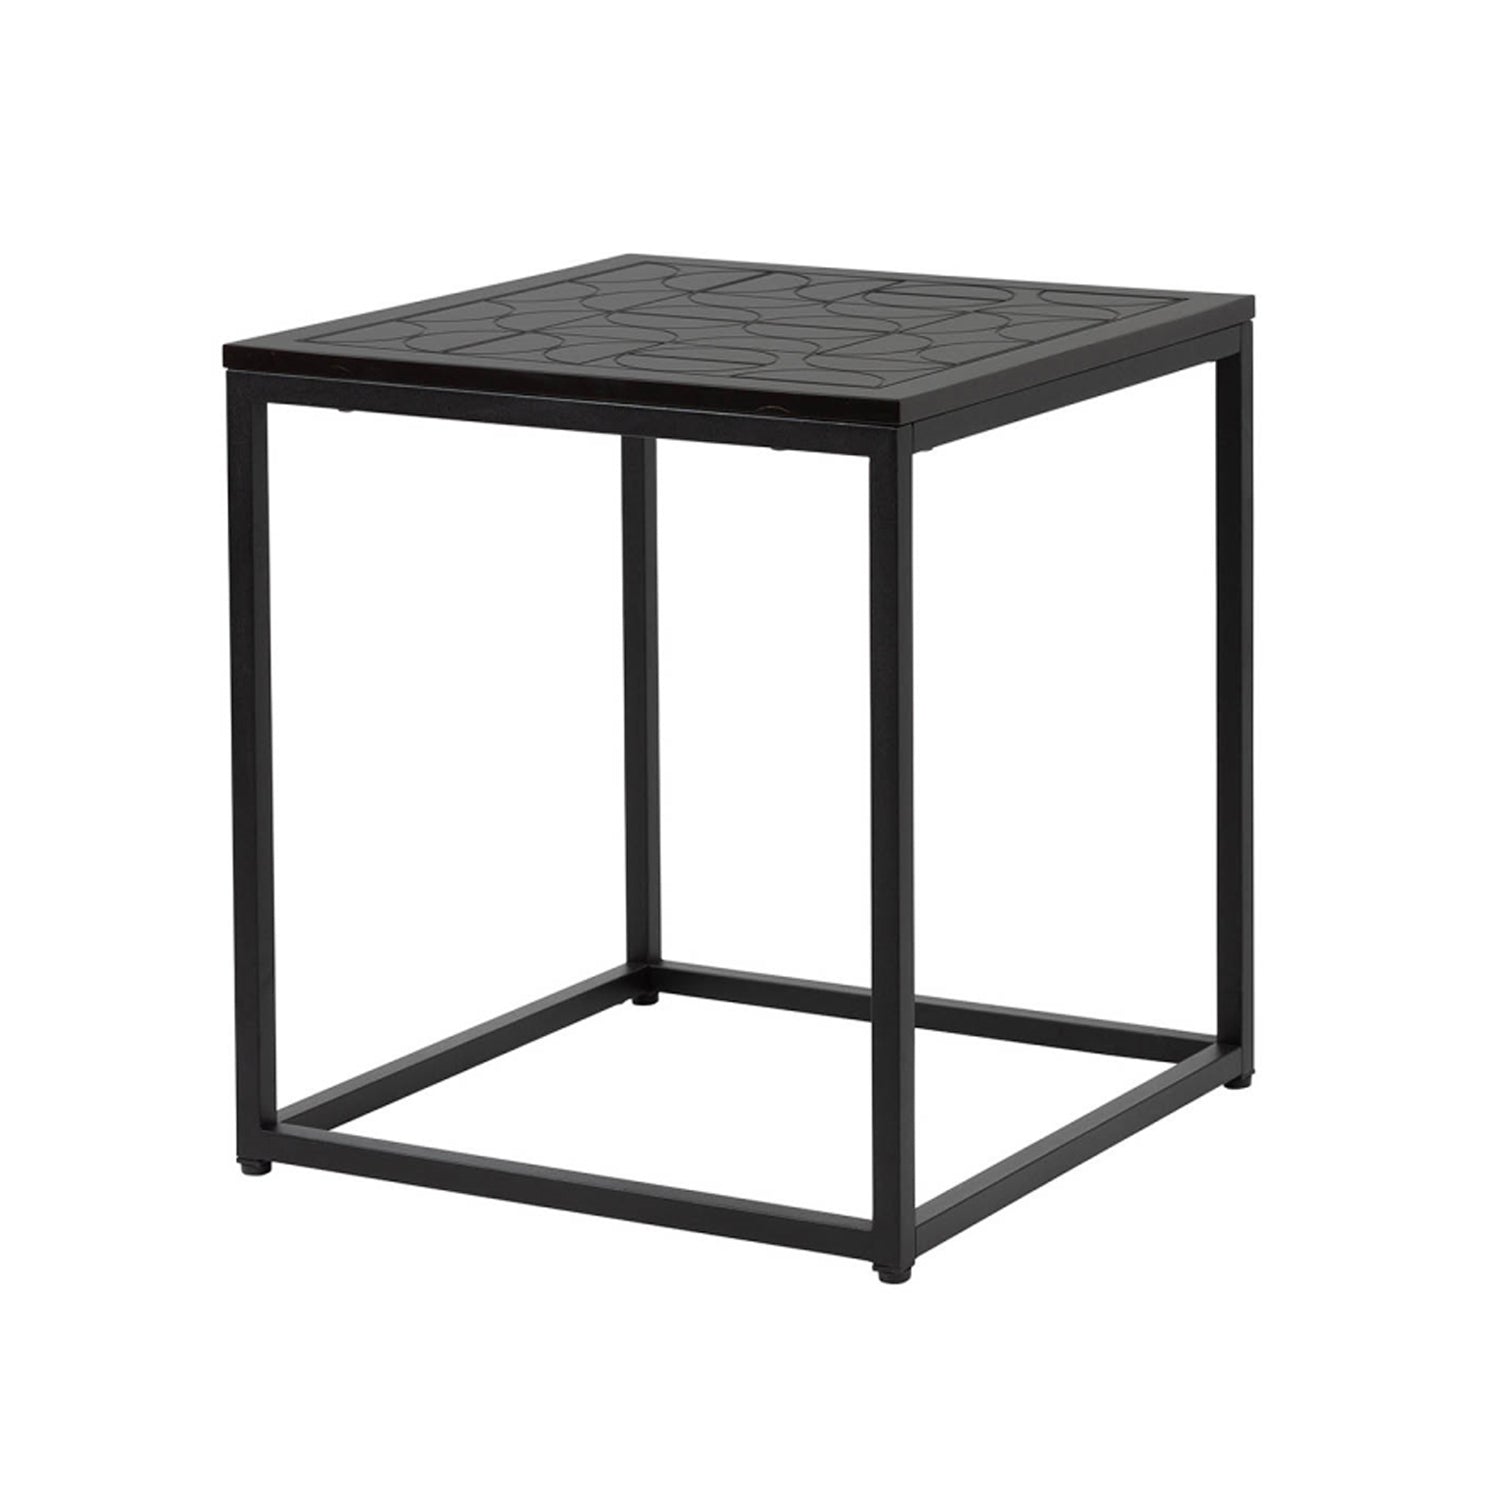 Black Stainless Steel End Table